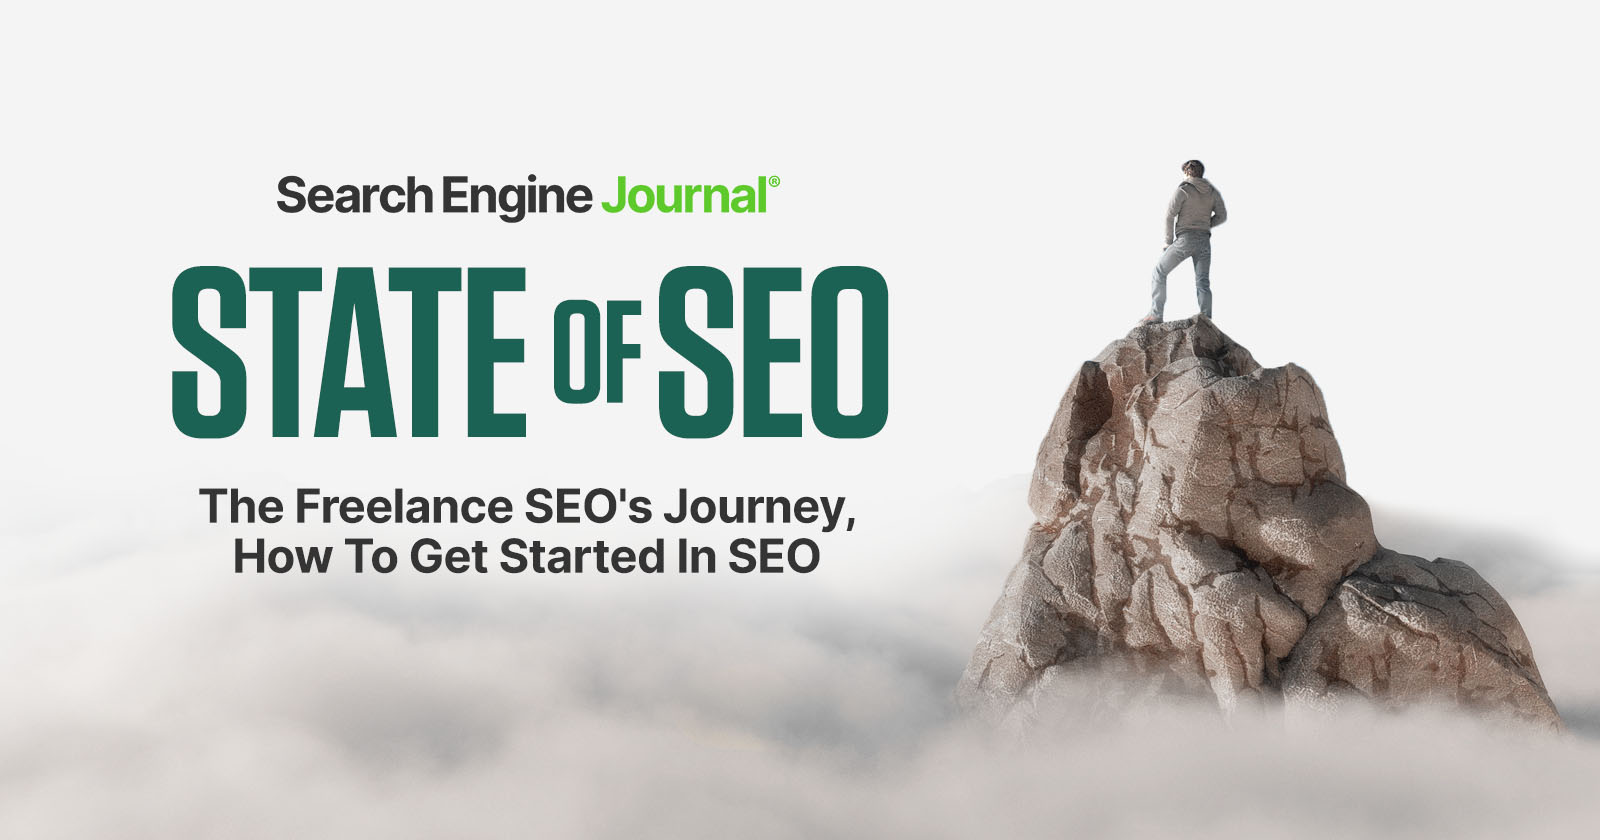 The Freelance SEO's Journey, How To Get Started In SEO